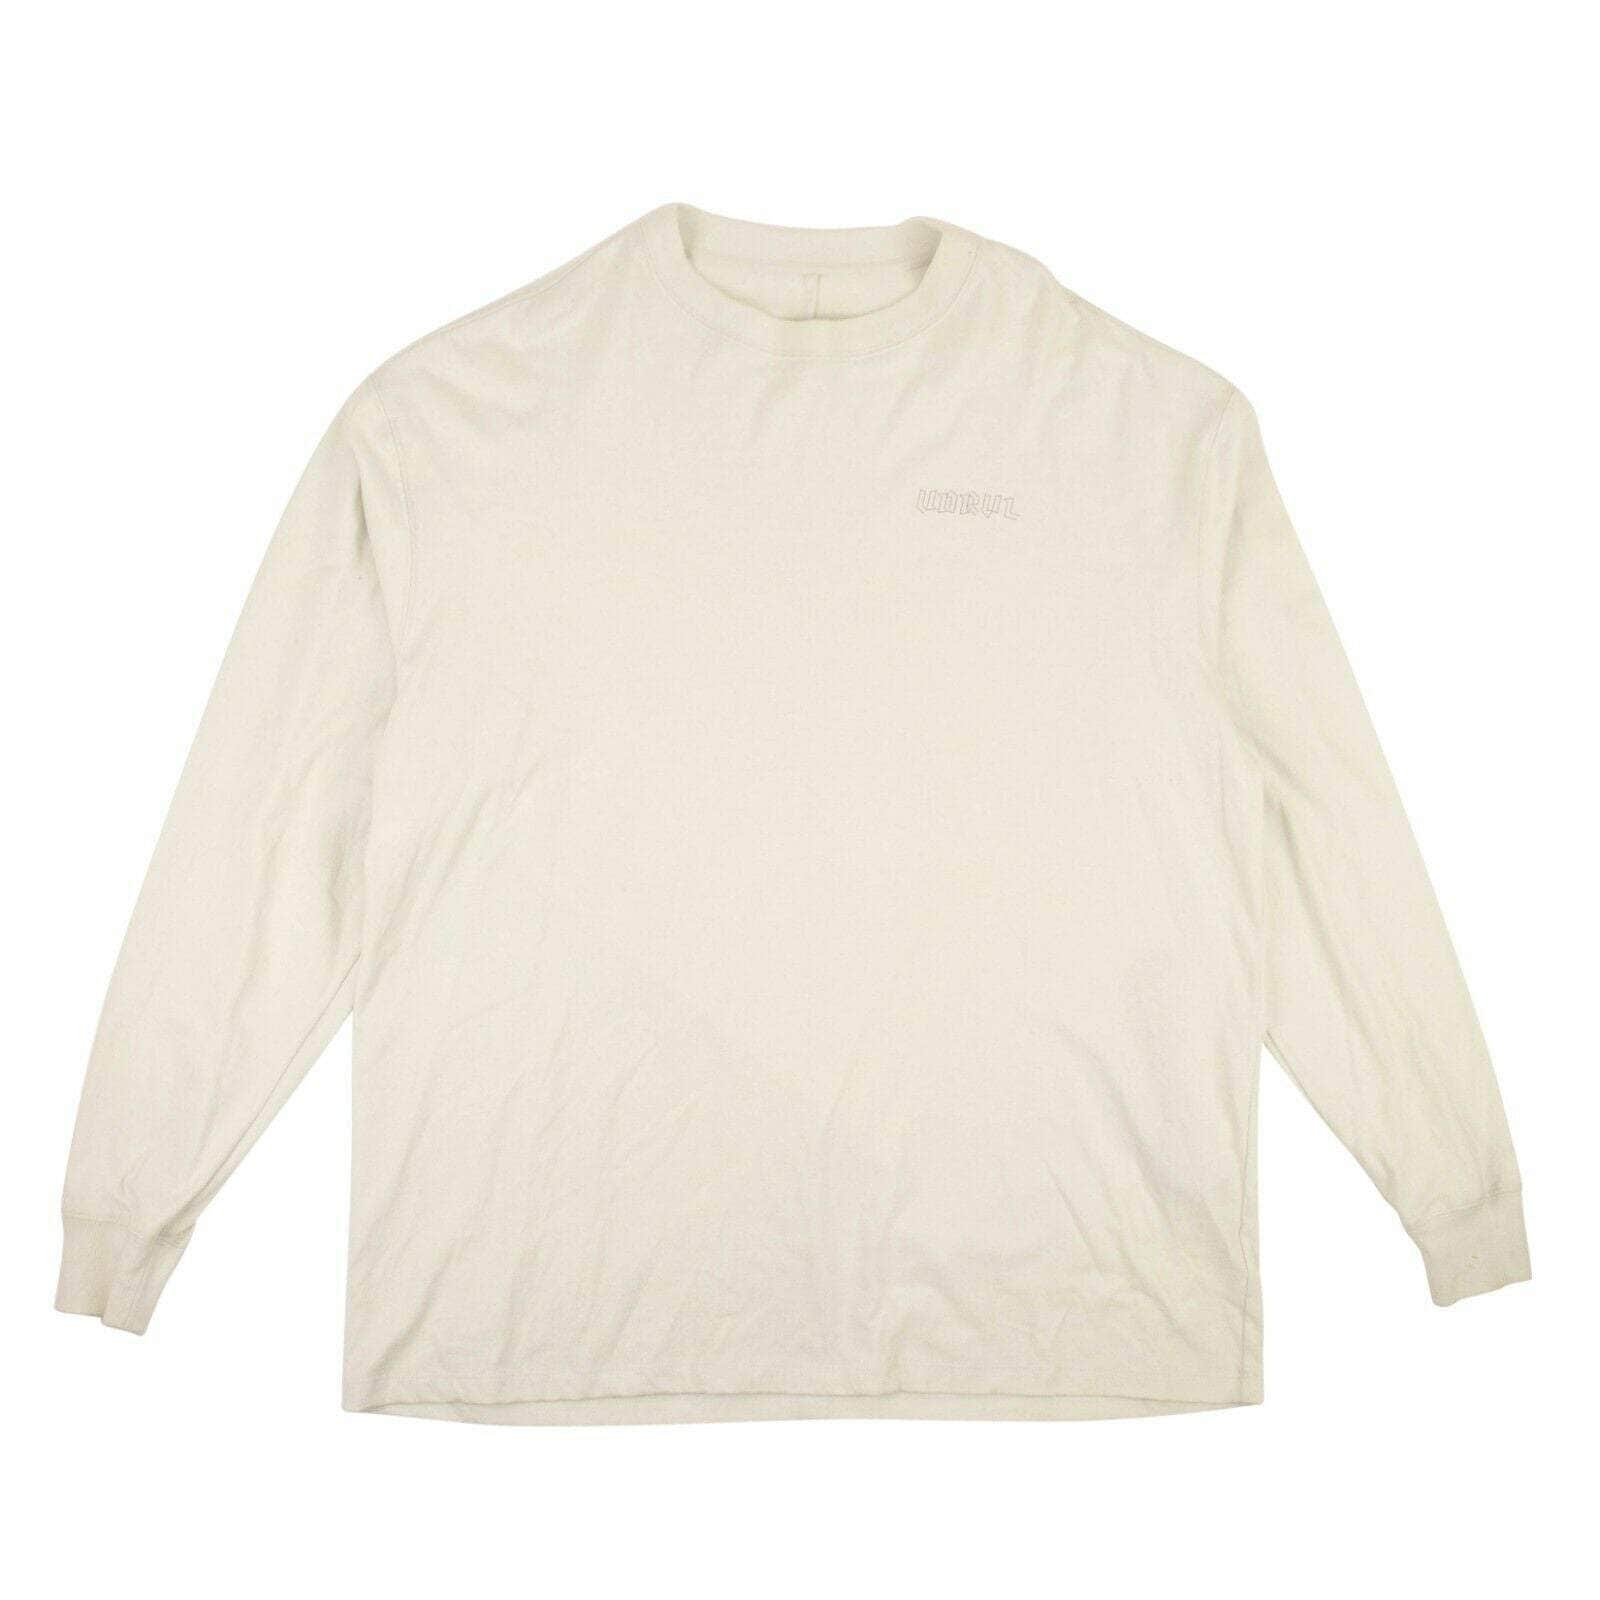 UNRAVEL PROJECT channelenable-all, couponcollection, gender-mens, main-clothing, size-m, under-250, unravel-project XS / 82NGG-UN-1009/XS Light Gray Cotton Long Sleeve T-Shirt 82NGG-UN-1009/XS 82NGG-UN-1009/XS